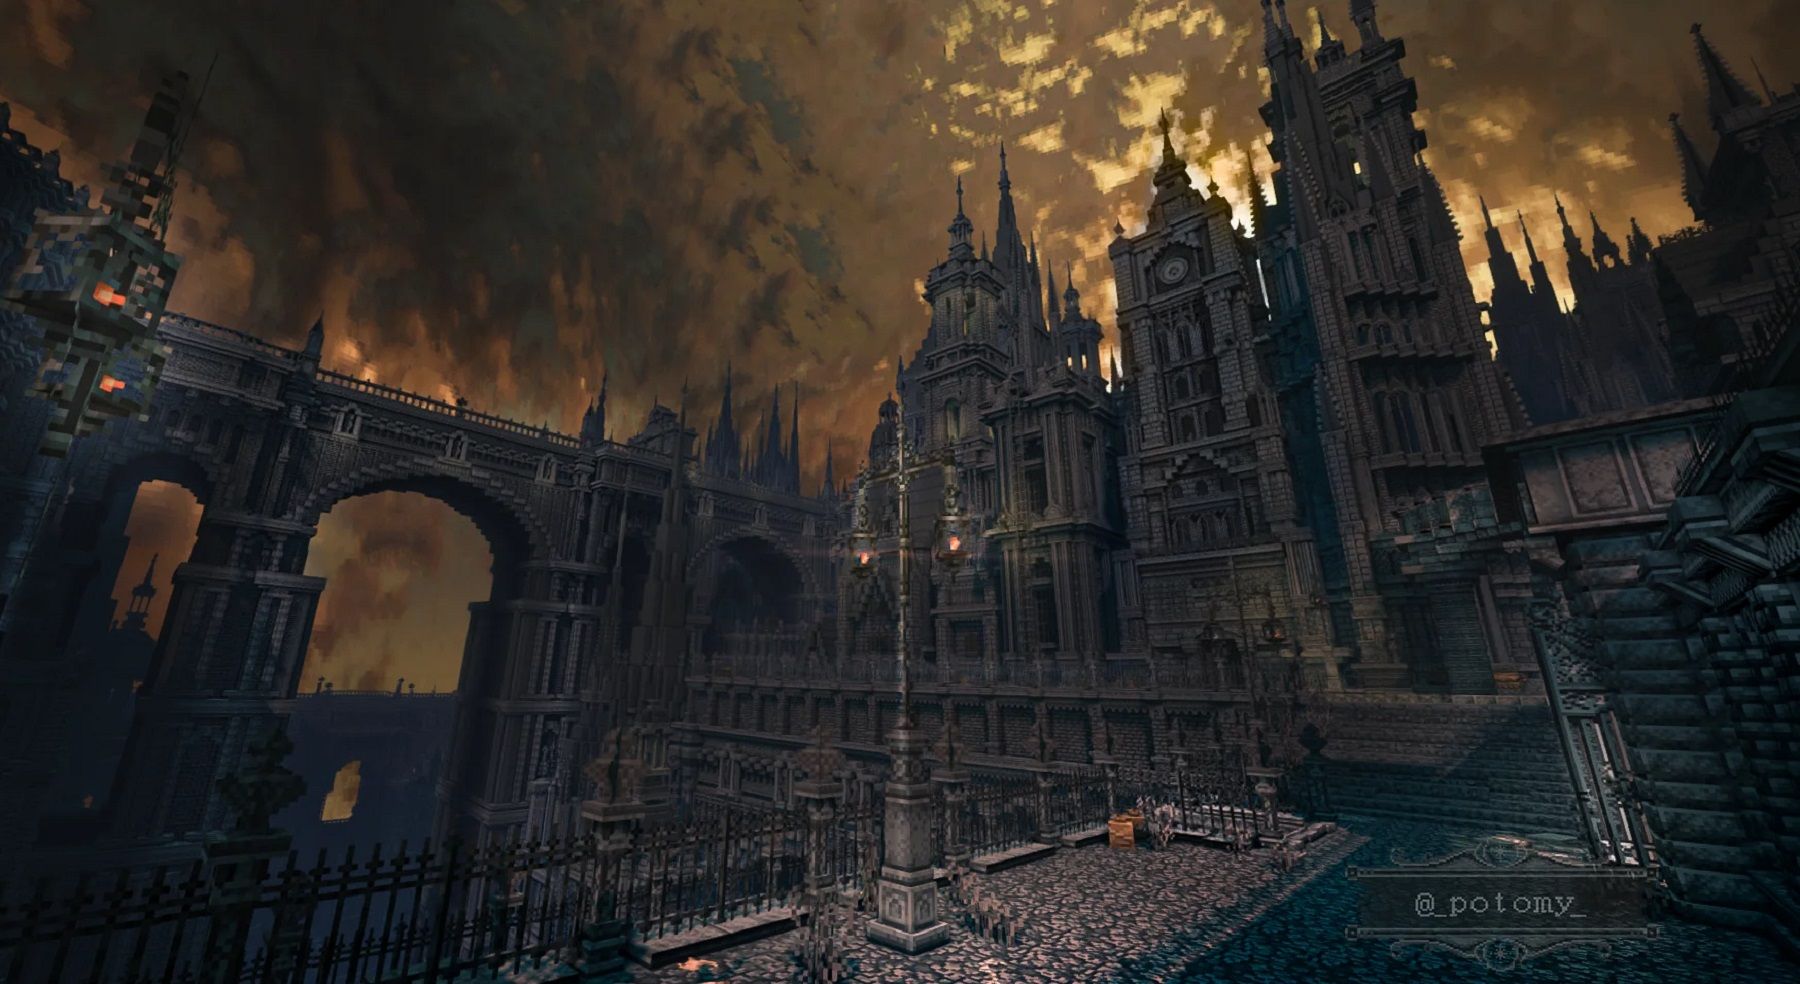 Minecraft screenshot of Bloodborne's highly detailed recreation of the city of Yharnam.